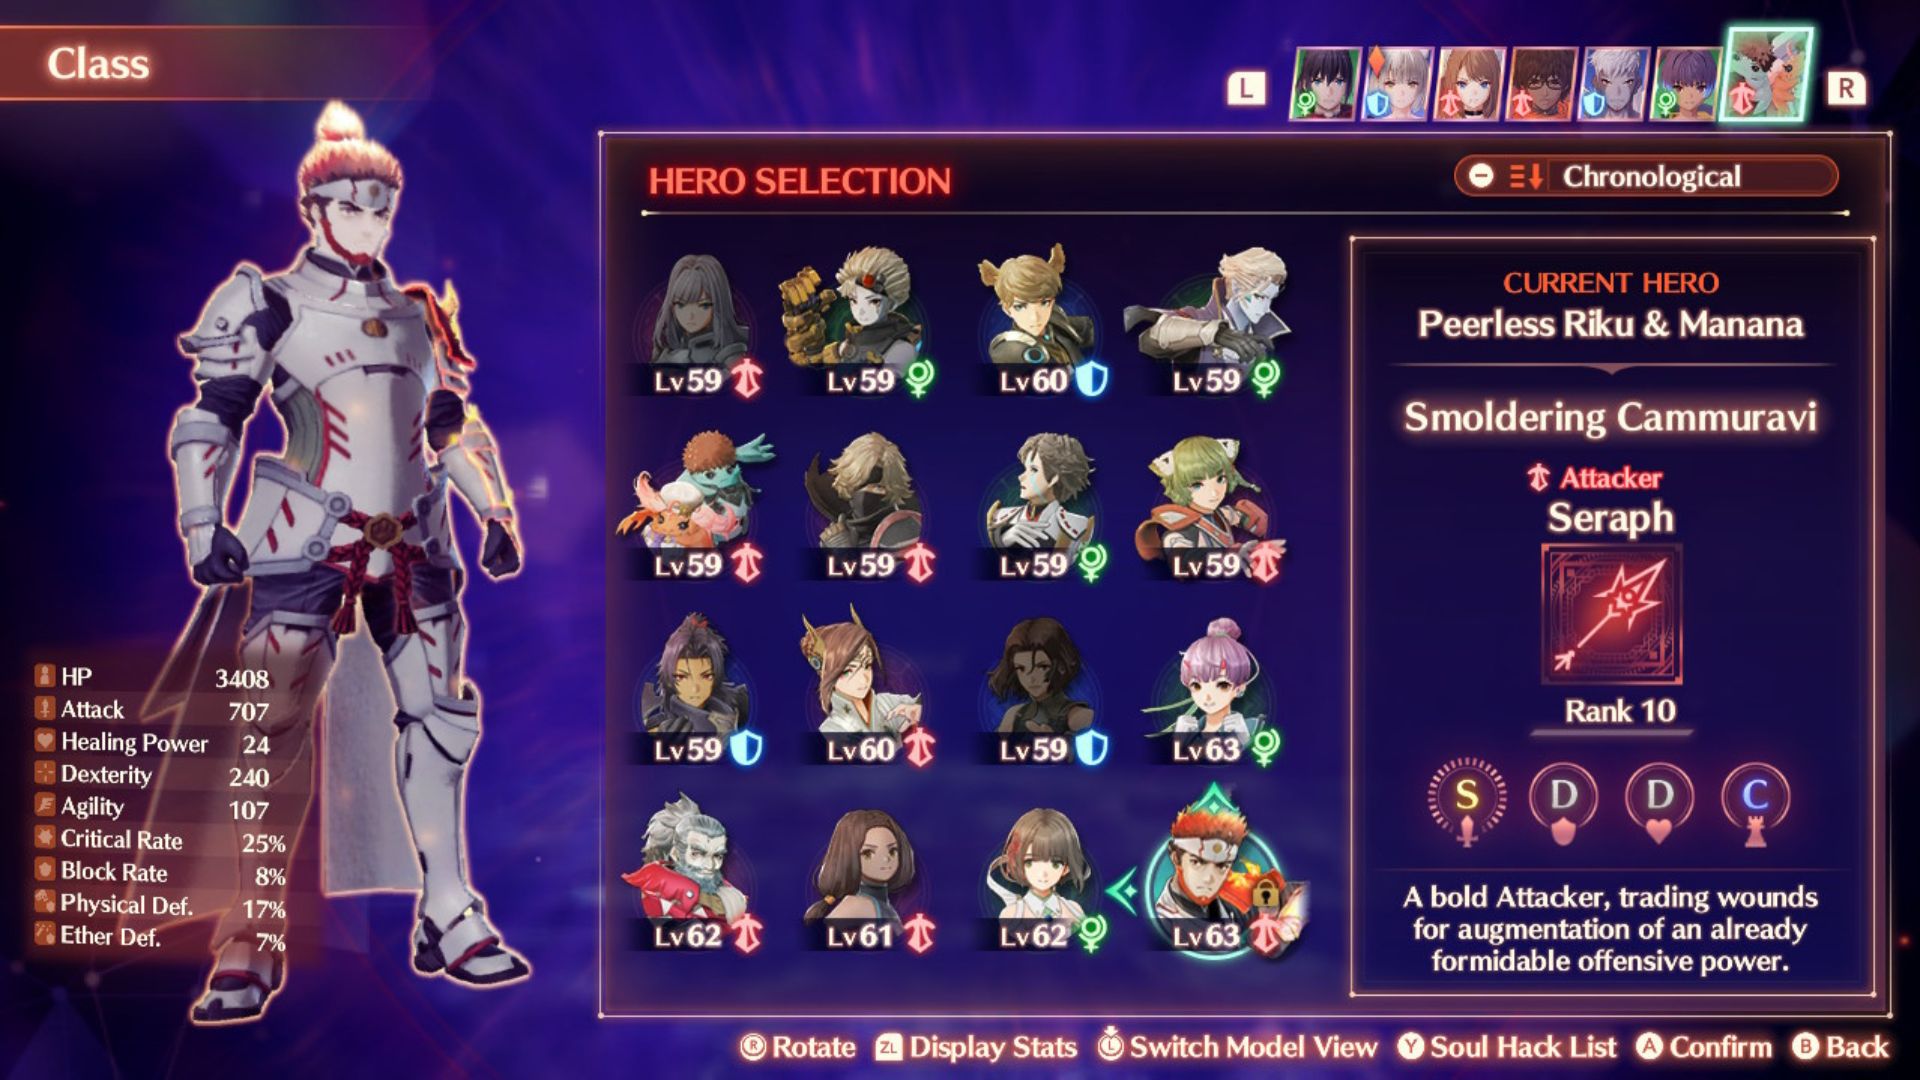 Xenoblade Chronicles 3, All Characters List